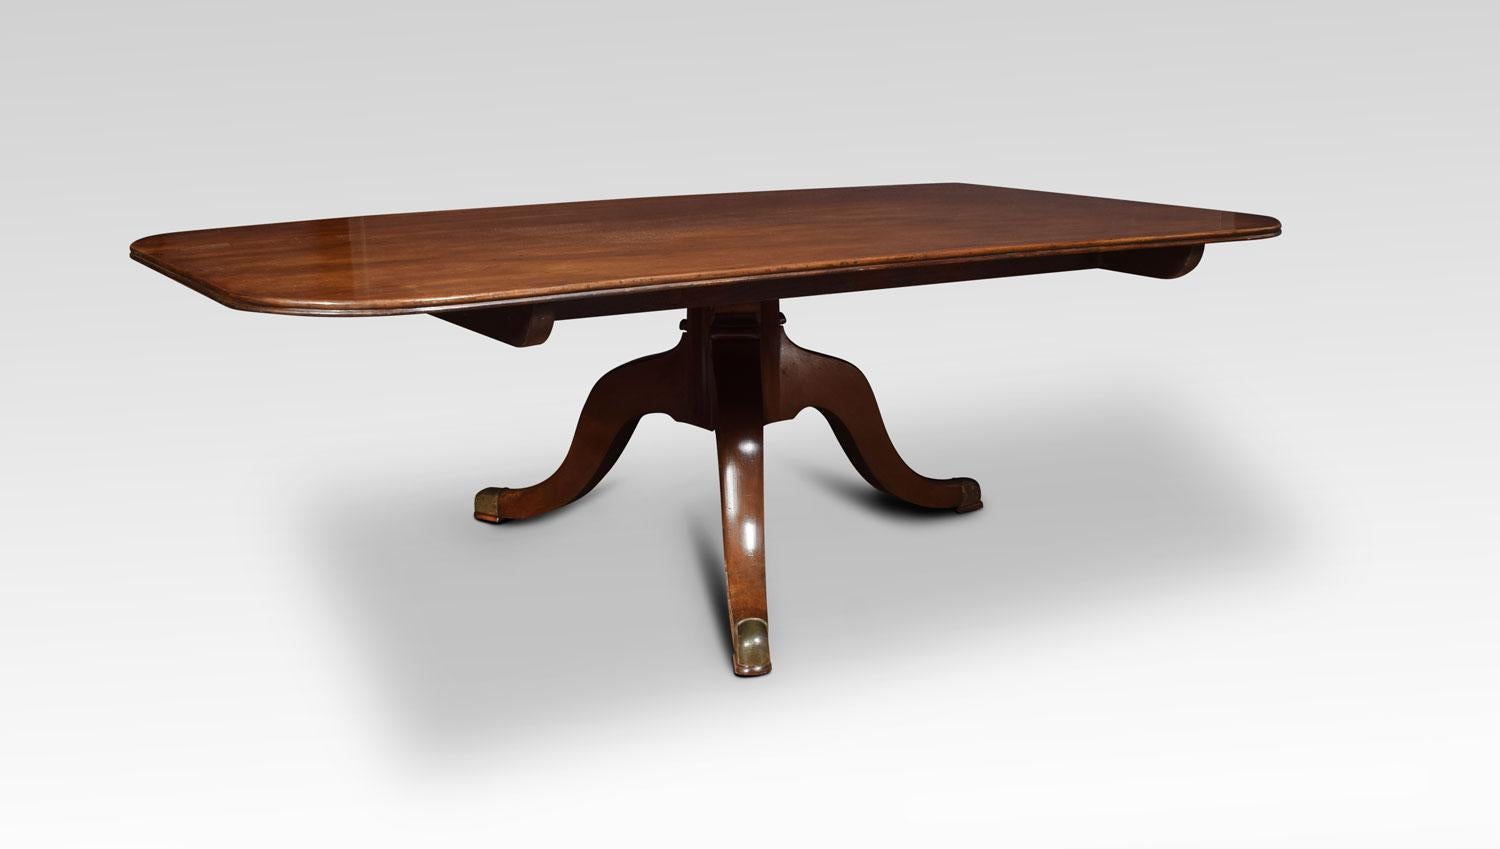 Regency mahogany coffee table, the rectangular top and moulded edge raised on tapering column terminating in pedestal base this table has been reduced to coffee table height
Dimensions:
Height 20.5 inches
Width 64.5 inches
Depth 37 inches.